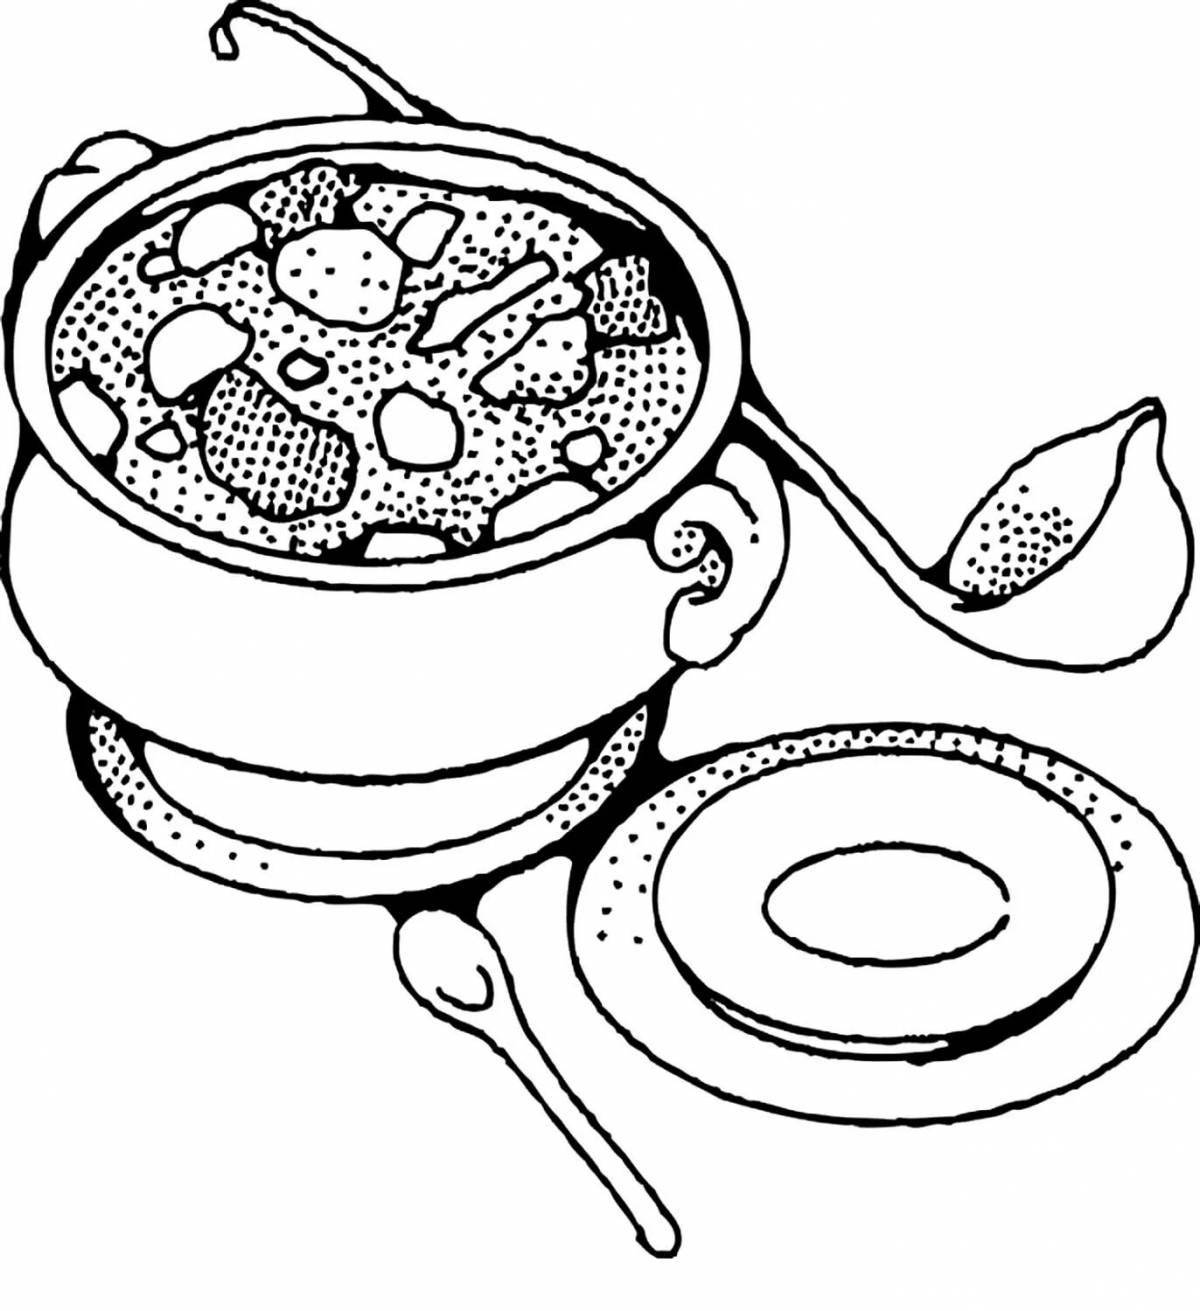 Coloring pages wonderful meals for kids